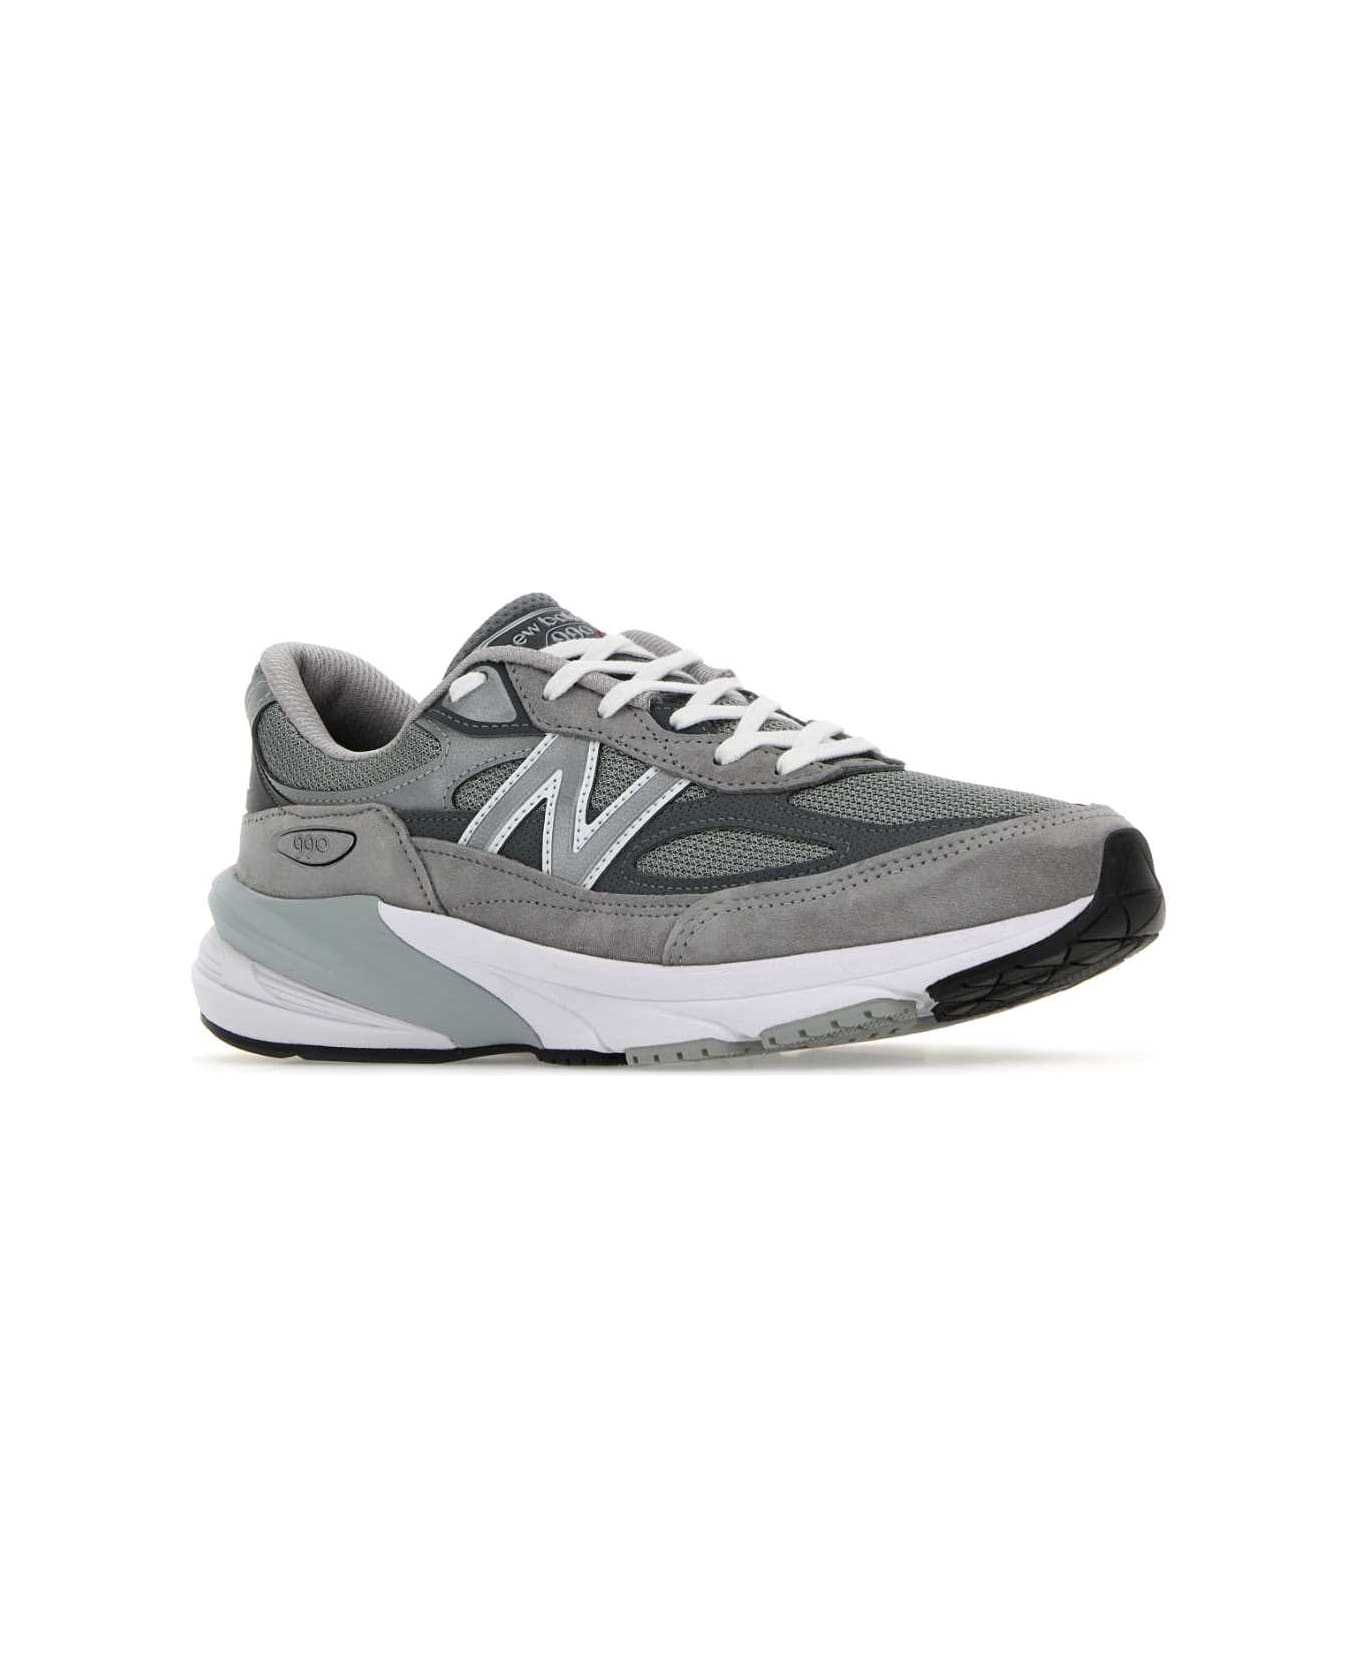 New Balance Multicolor Fabric And Suede 990v6 Sneakers - GREY